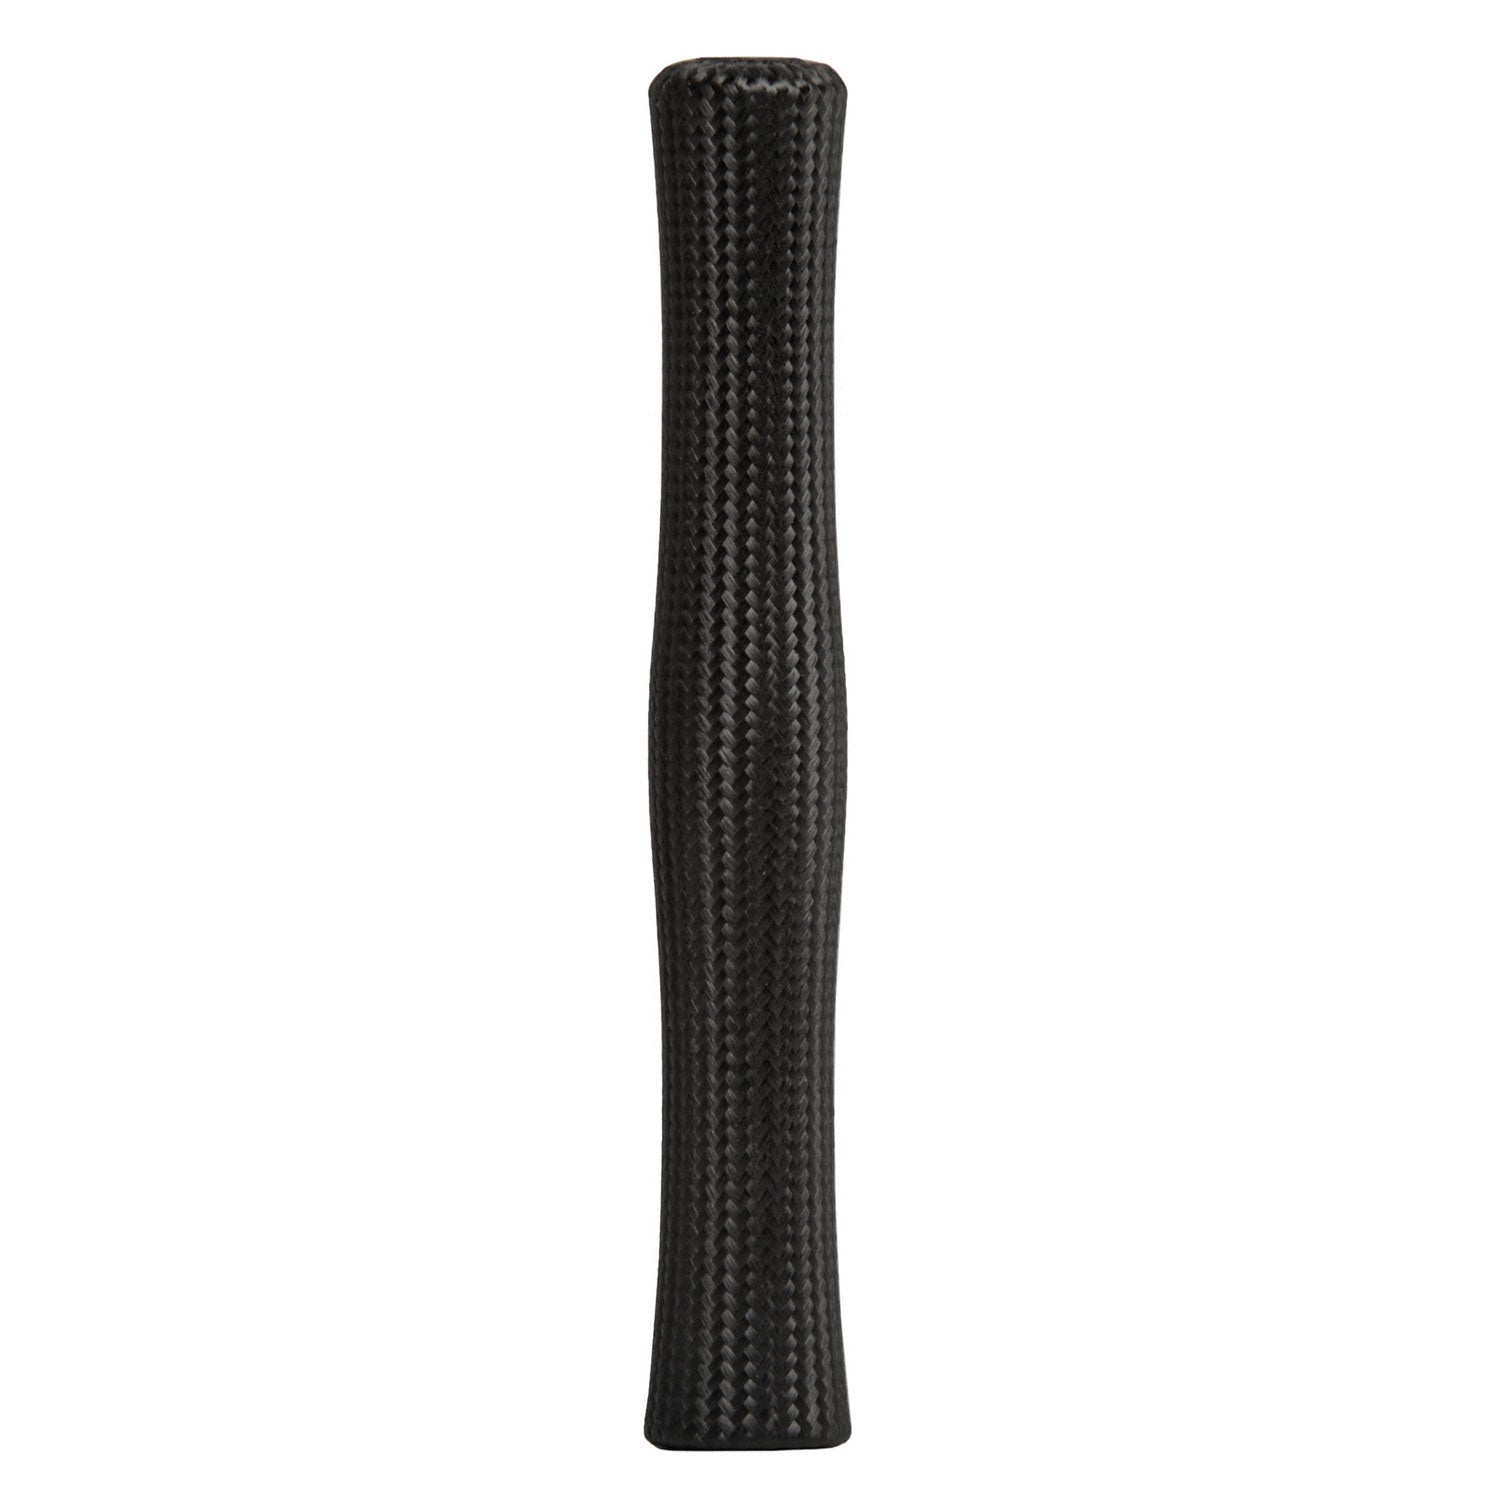 CFX Composite Carbon Fiber Grips - 7.5" Full Wells Fly with Cutout